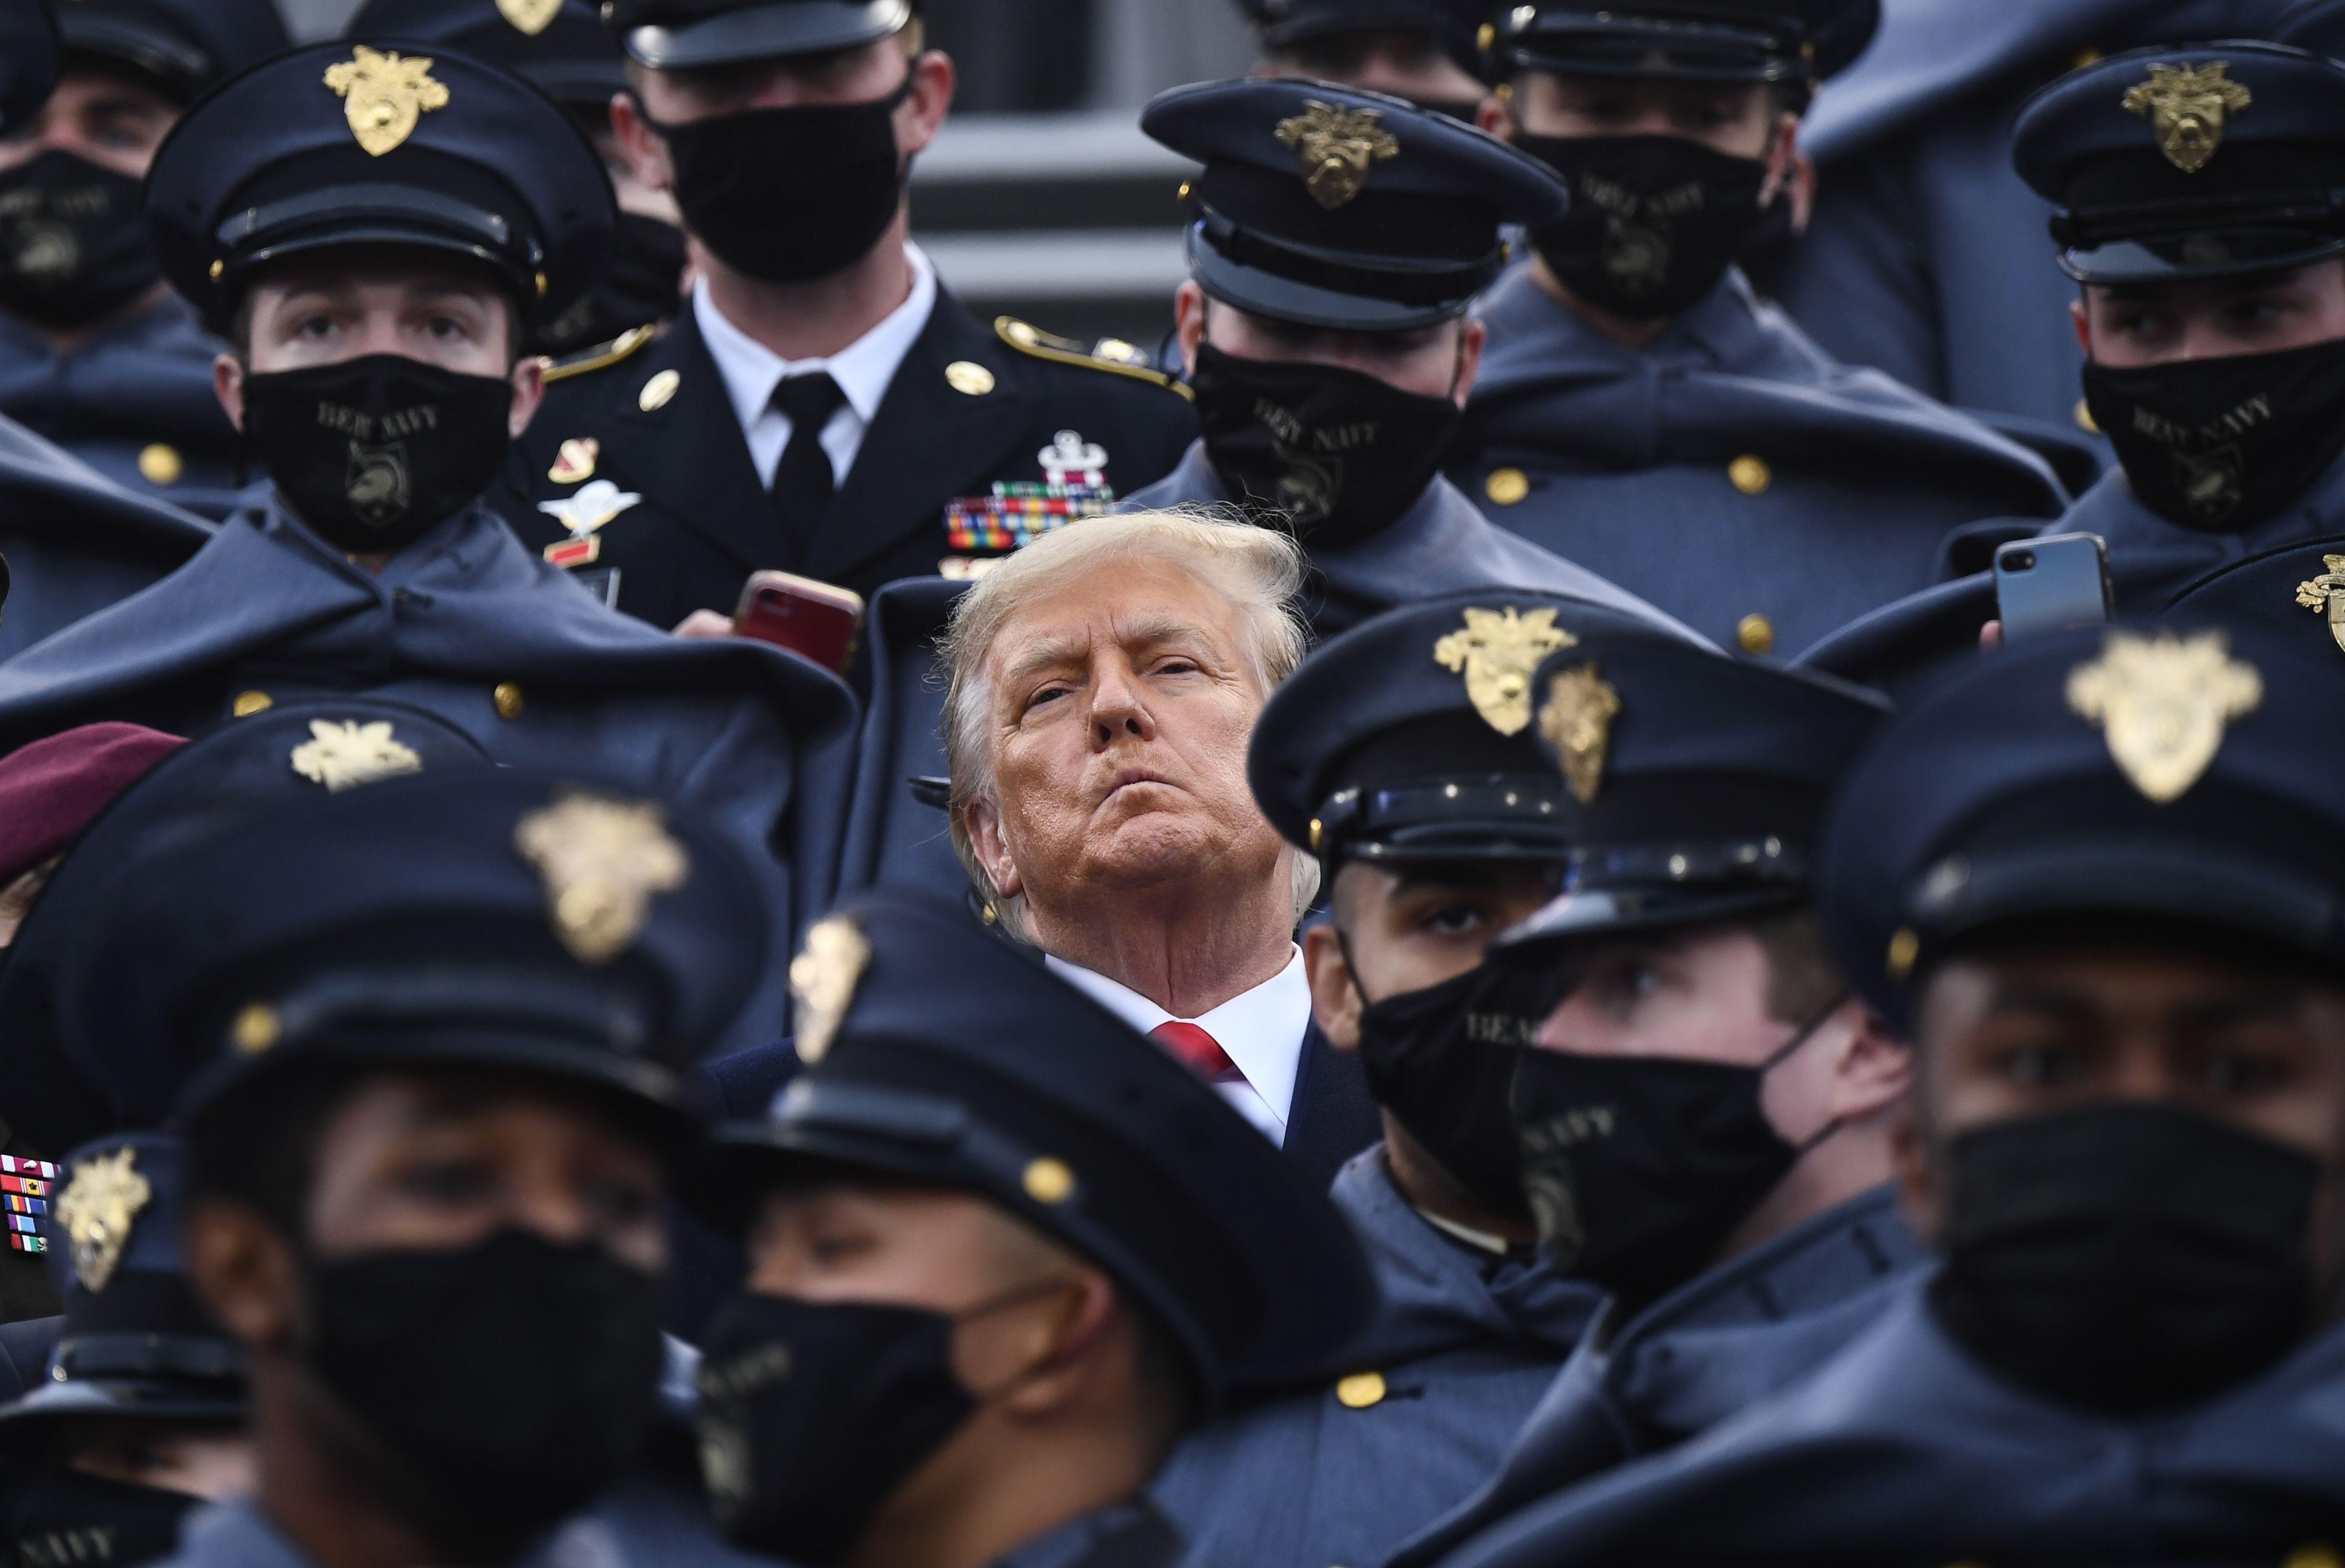 Trump with his mask off scowling in a sea of masked cadets.